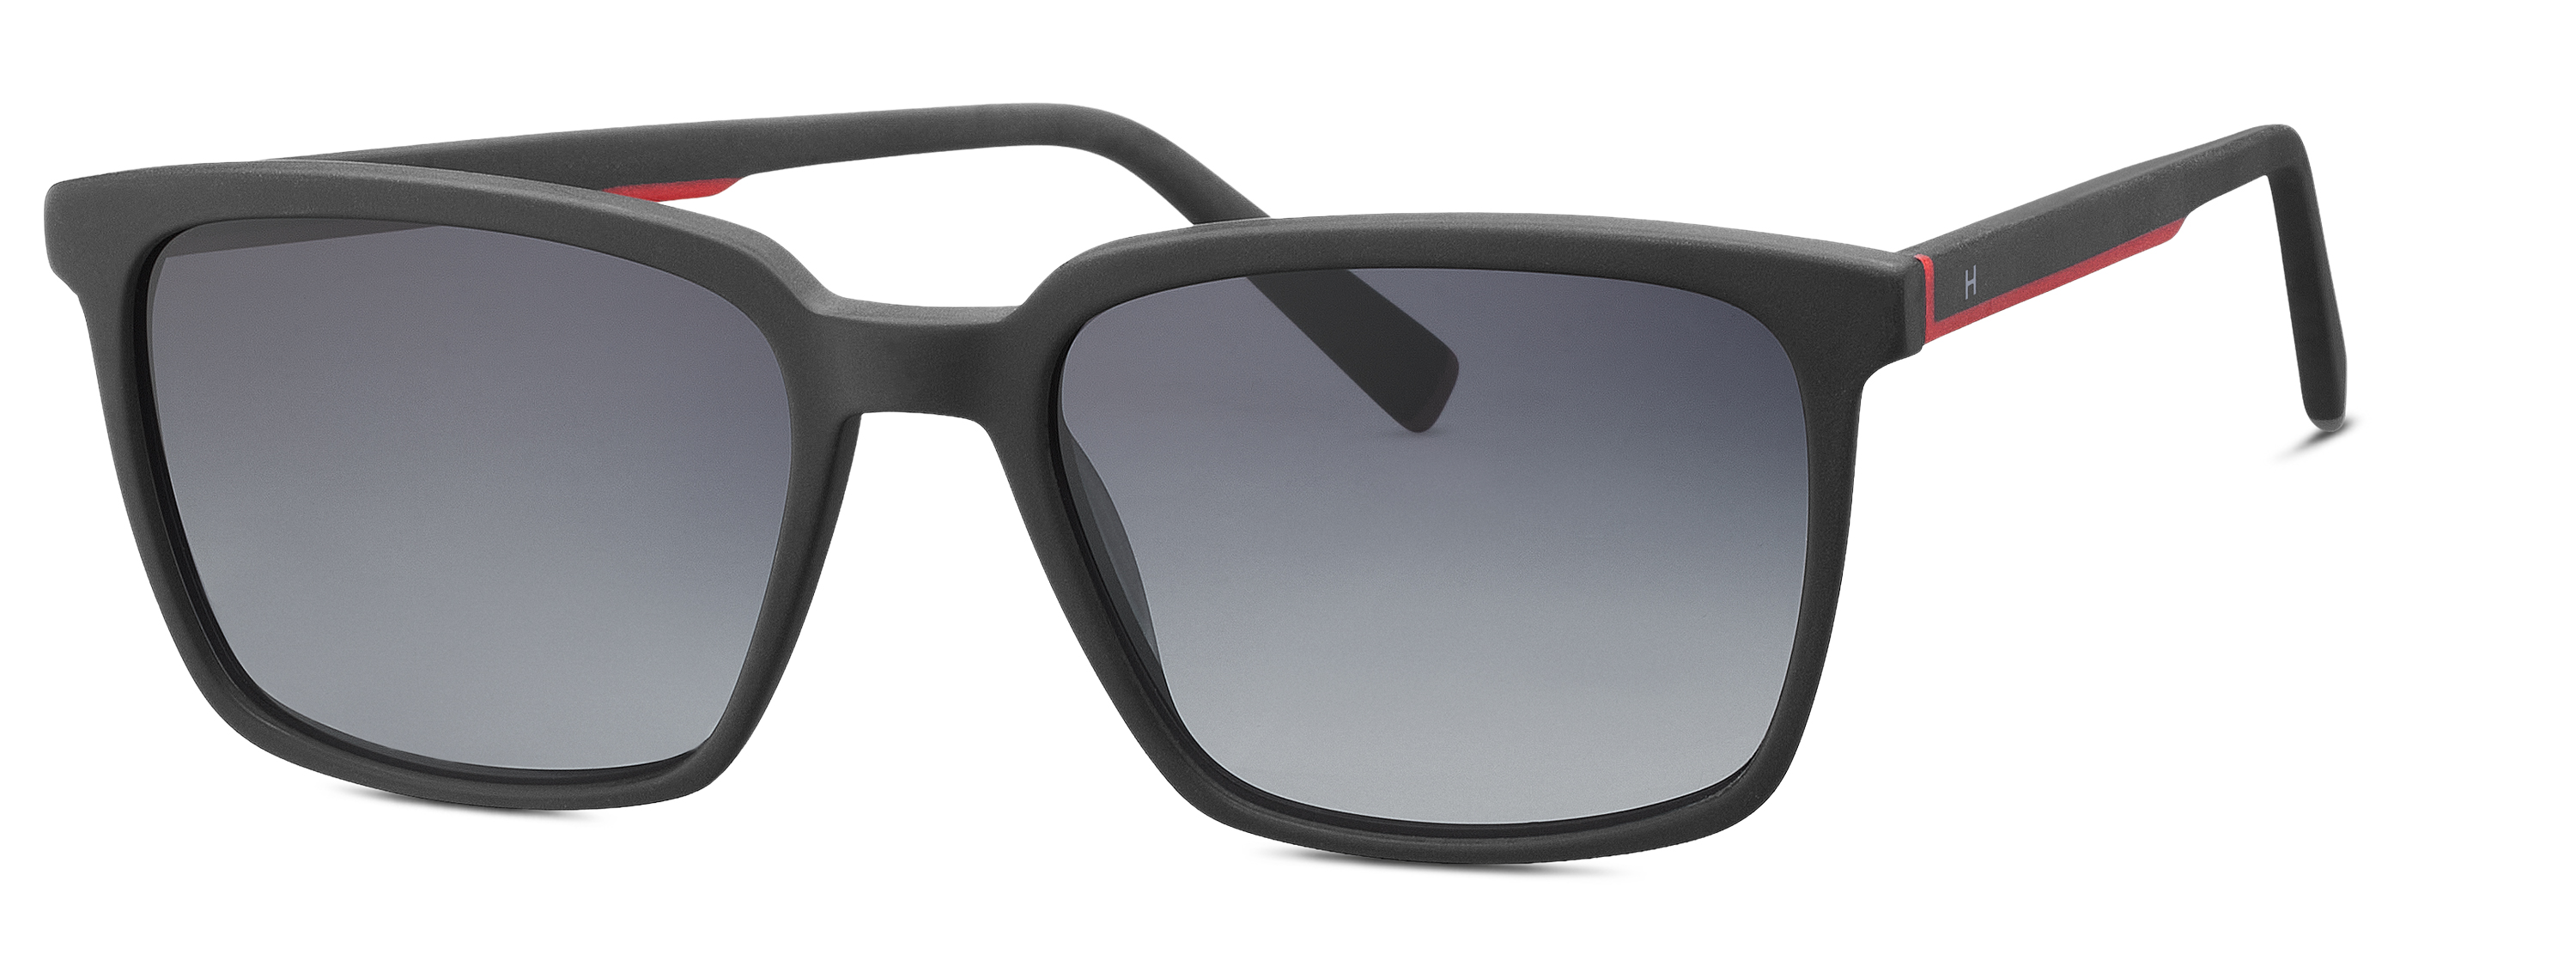 [products.image.front] HUMPHREY´S eyewear 588181 10 Sonnenbrille